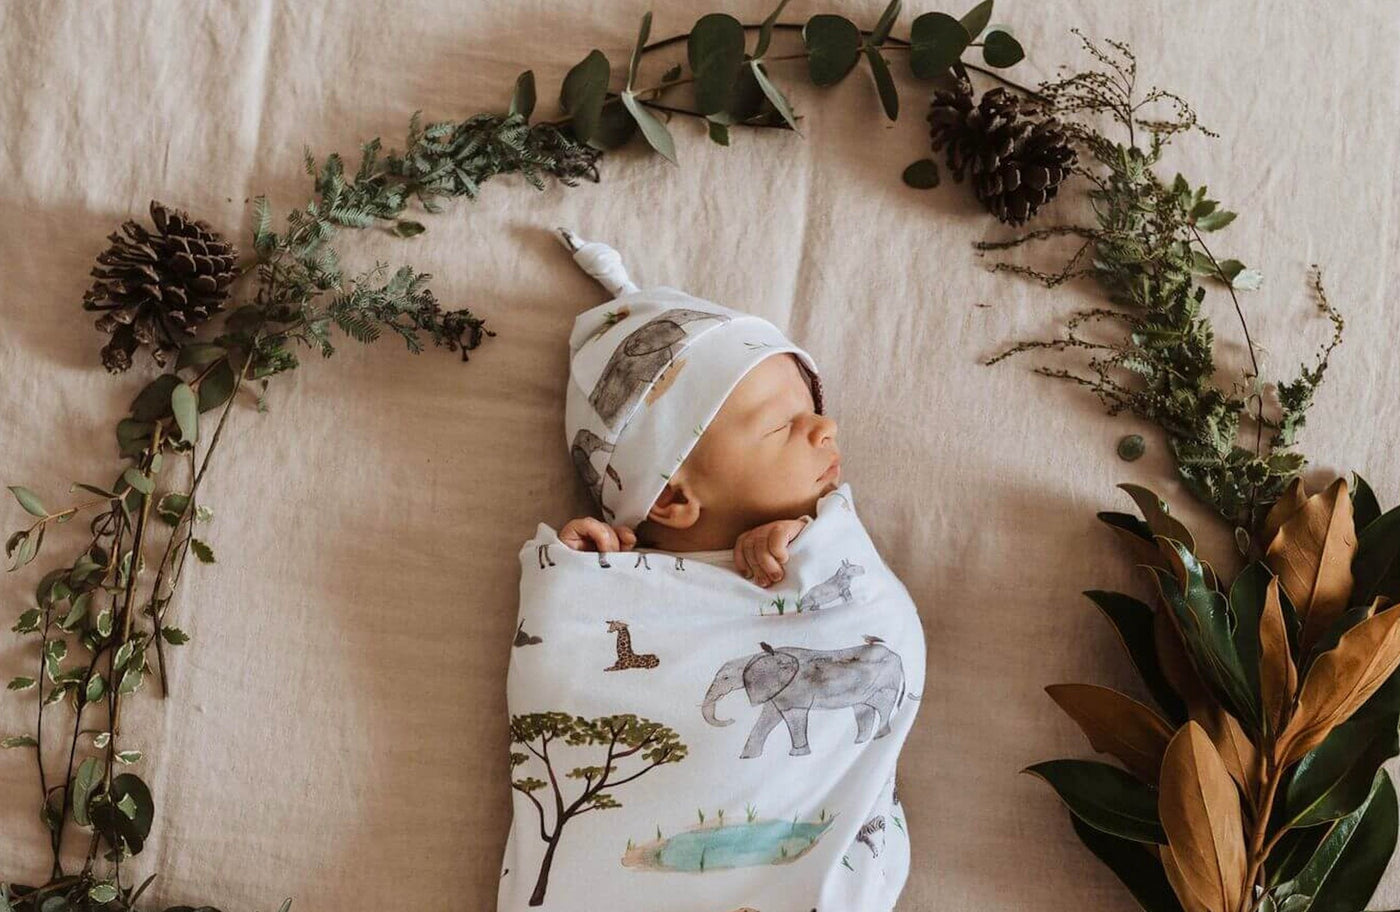 A child comfortably resting with a Snuggle Swaddle & Beanie Set, beautifully decorated with wild animals like giraffes, hippos, and elephants.